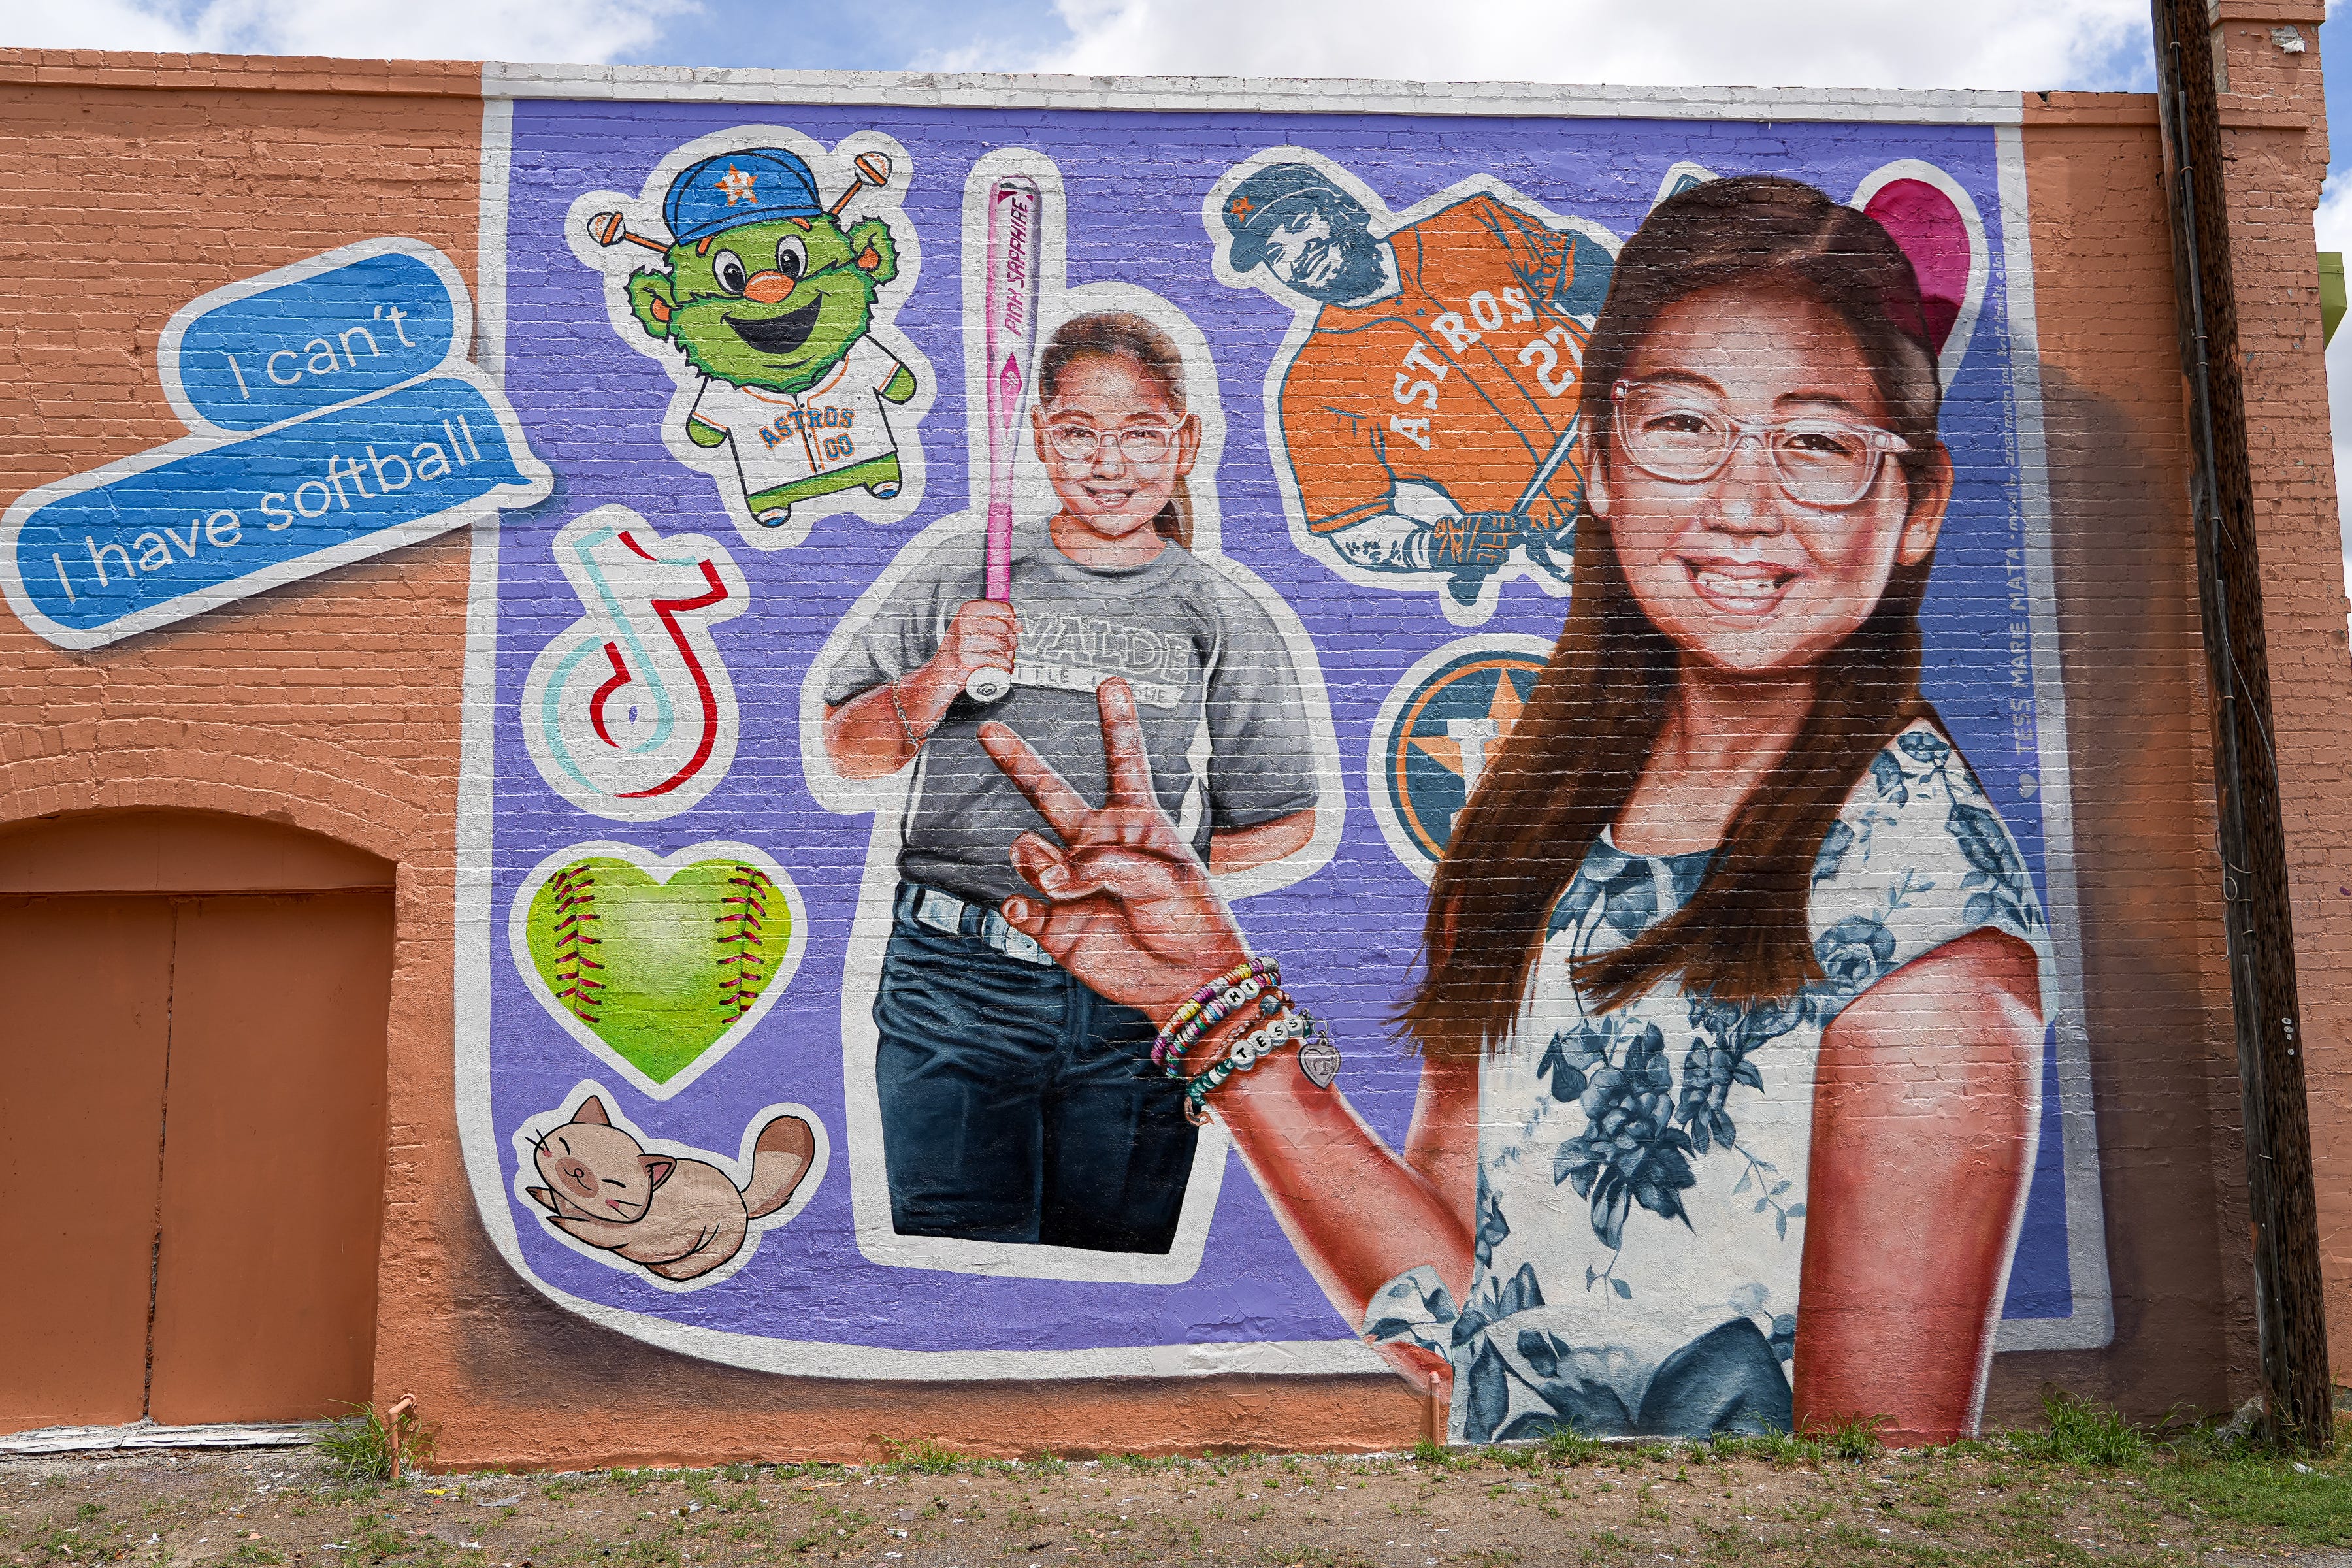 The mural for Tess Mata uses sticker motifs to show off her love for softball and the Houston Astros at the Once Upon A Time boutique at 114 W. Main St. in Uvalde.